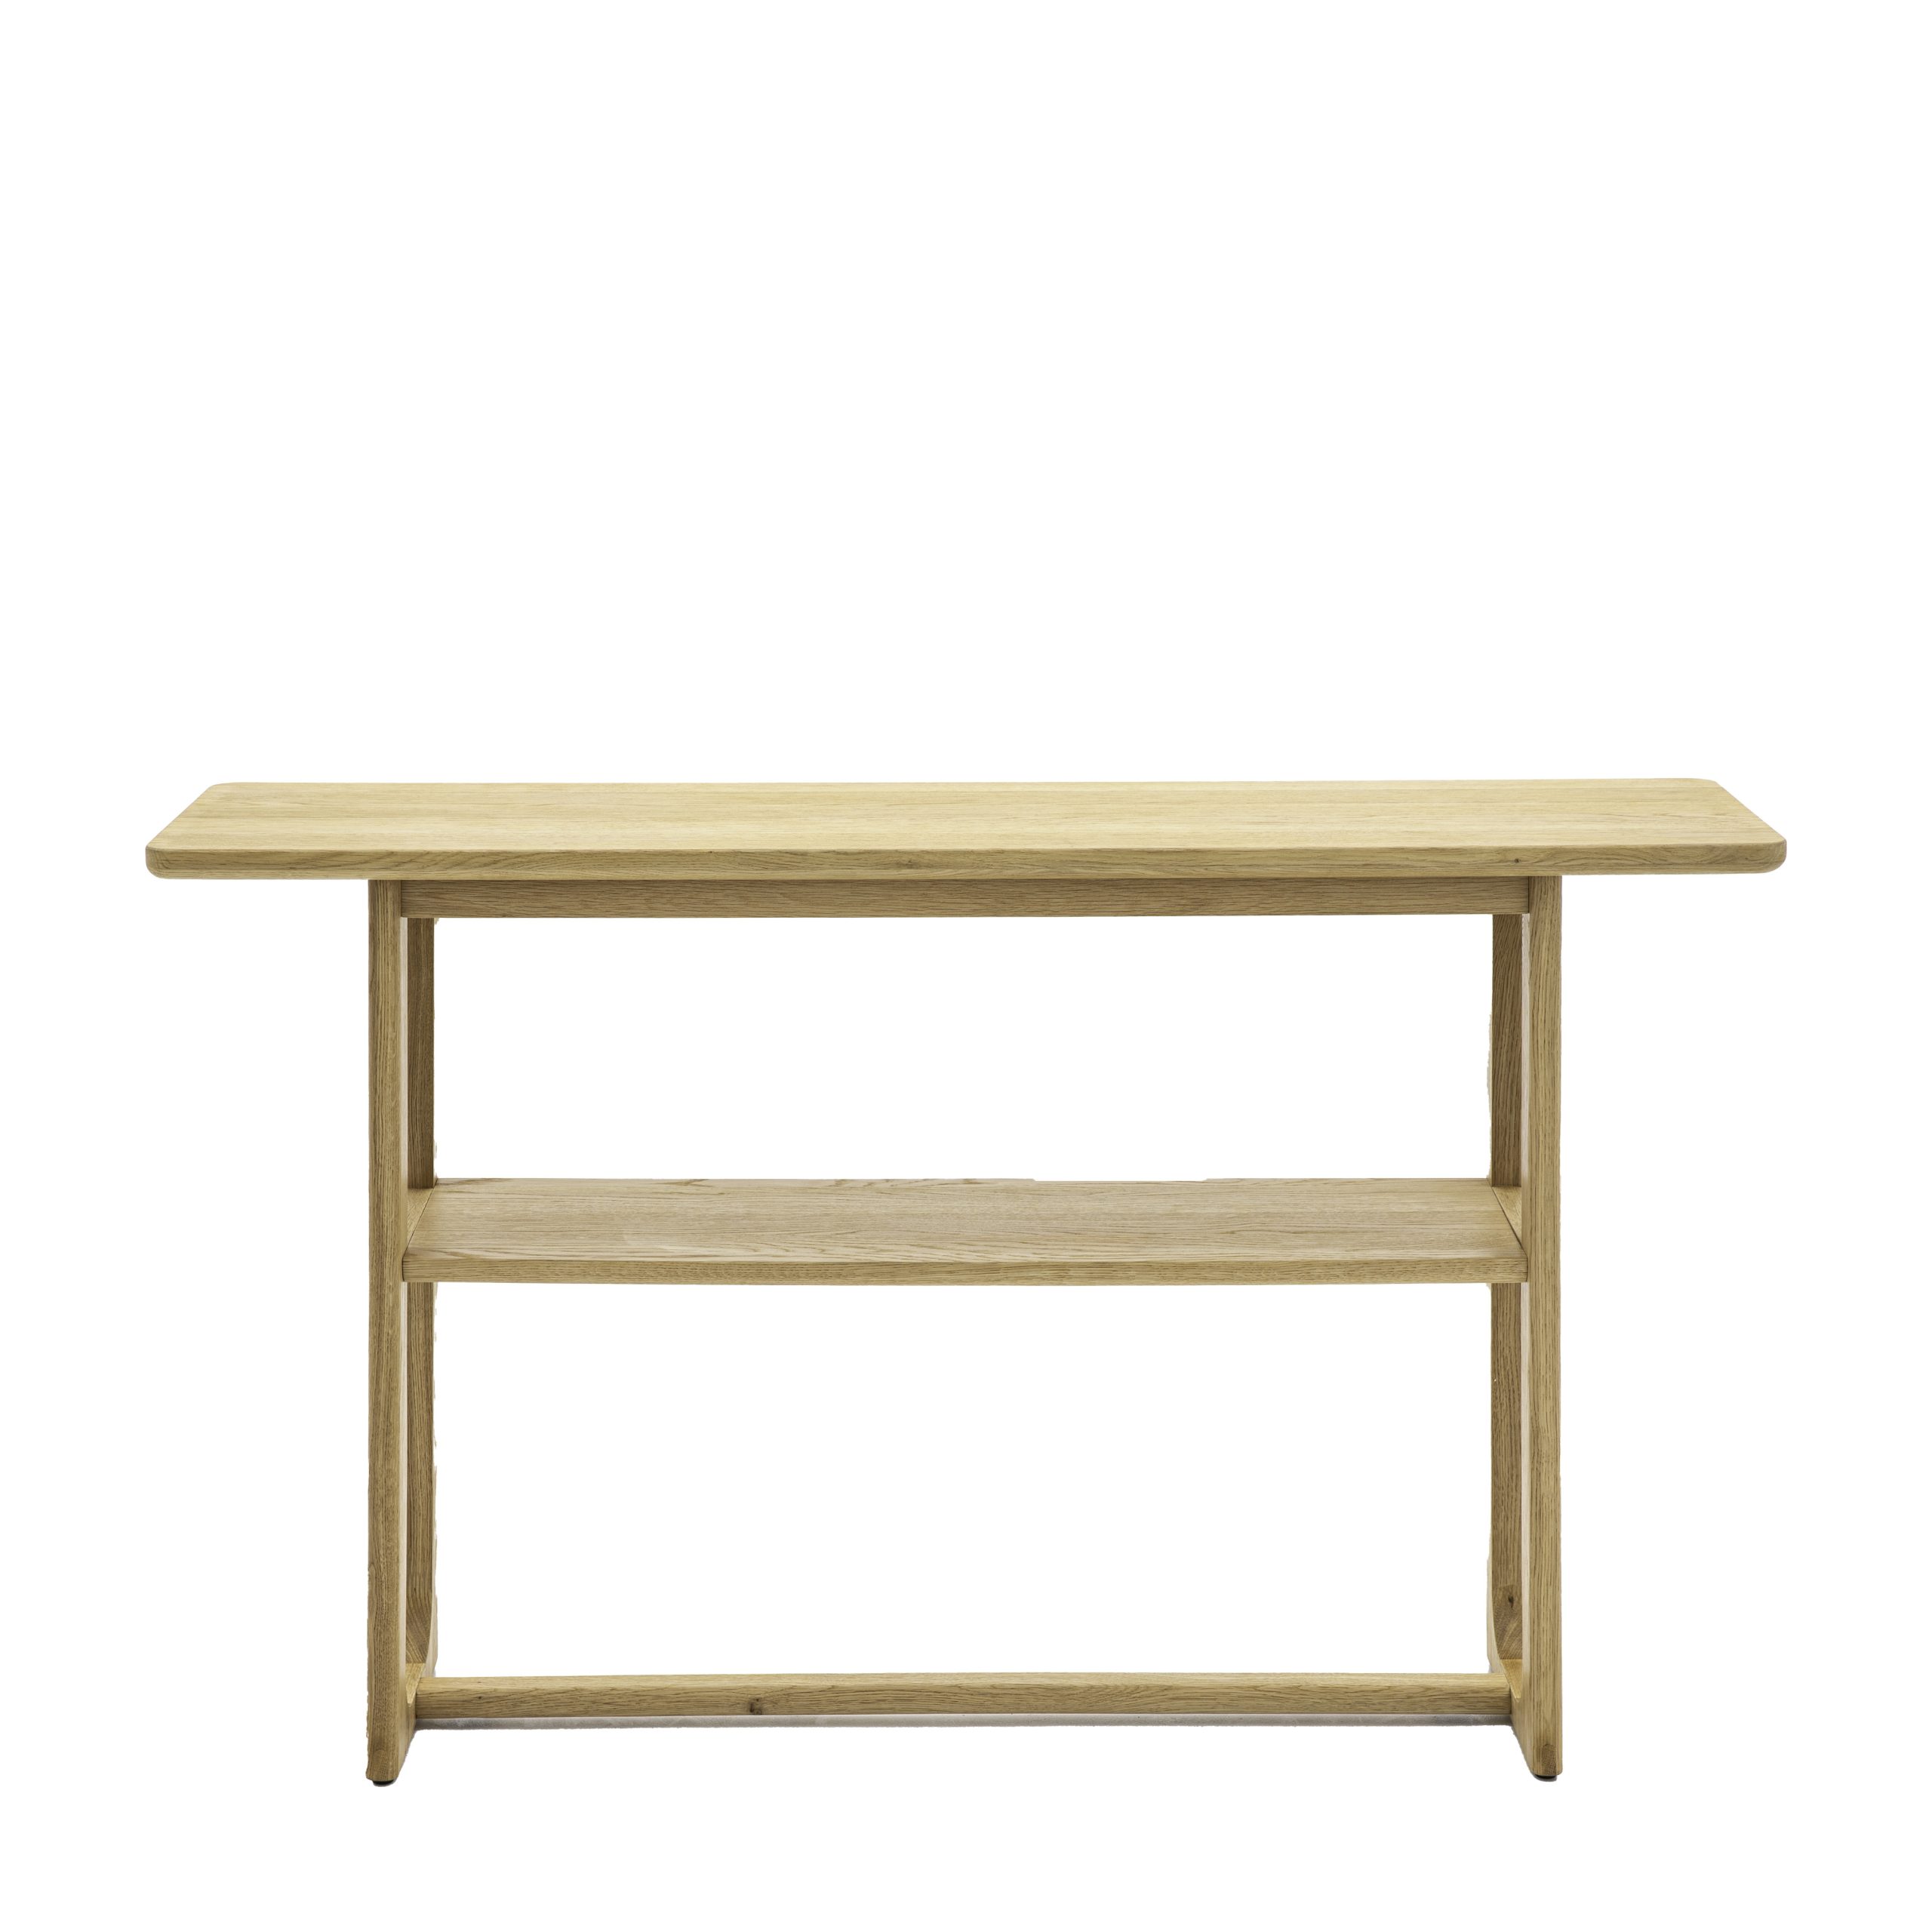 Gallery Direct Craft Console Table Natural